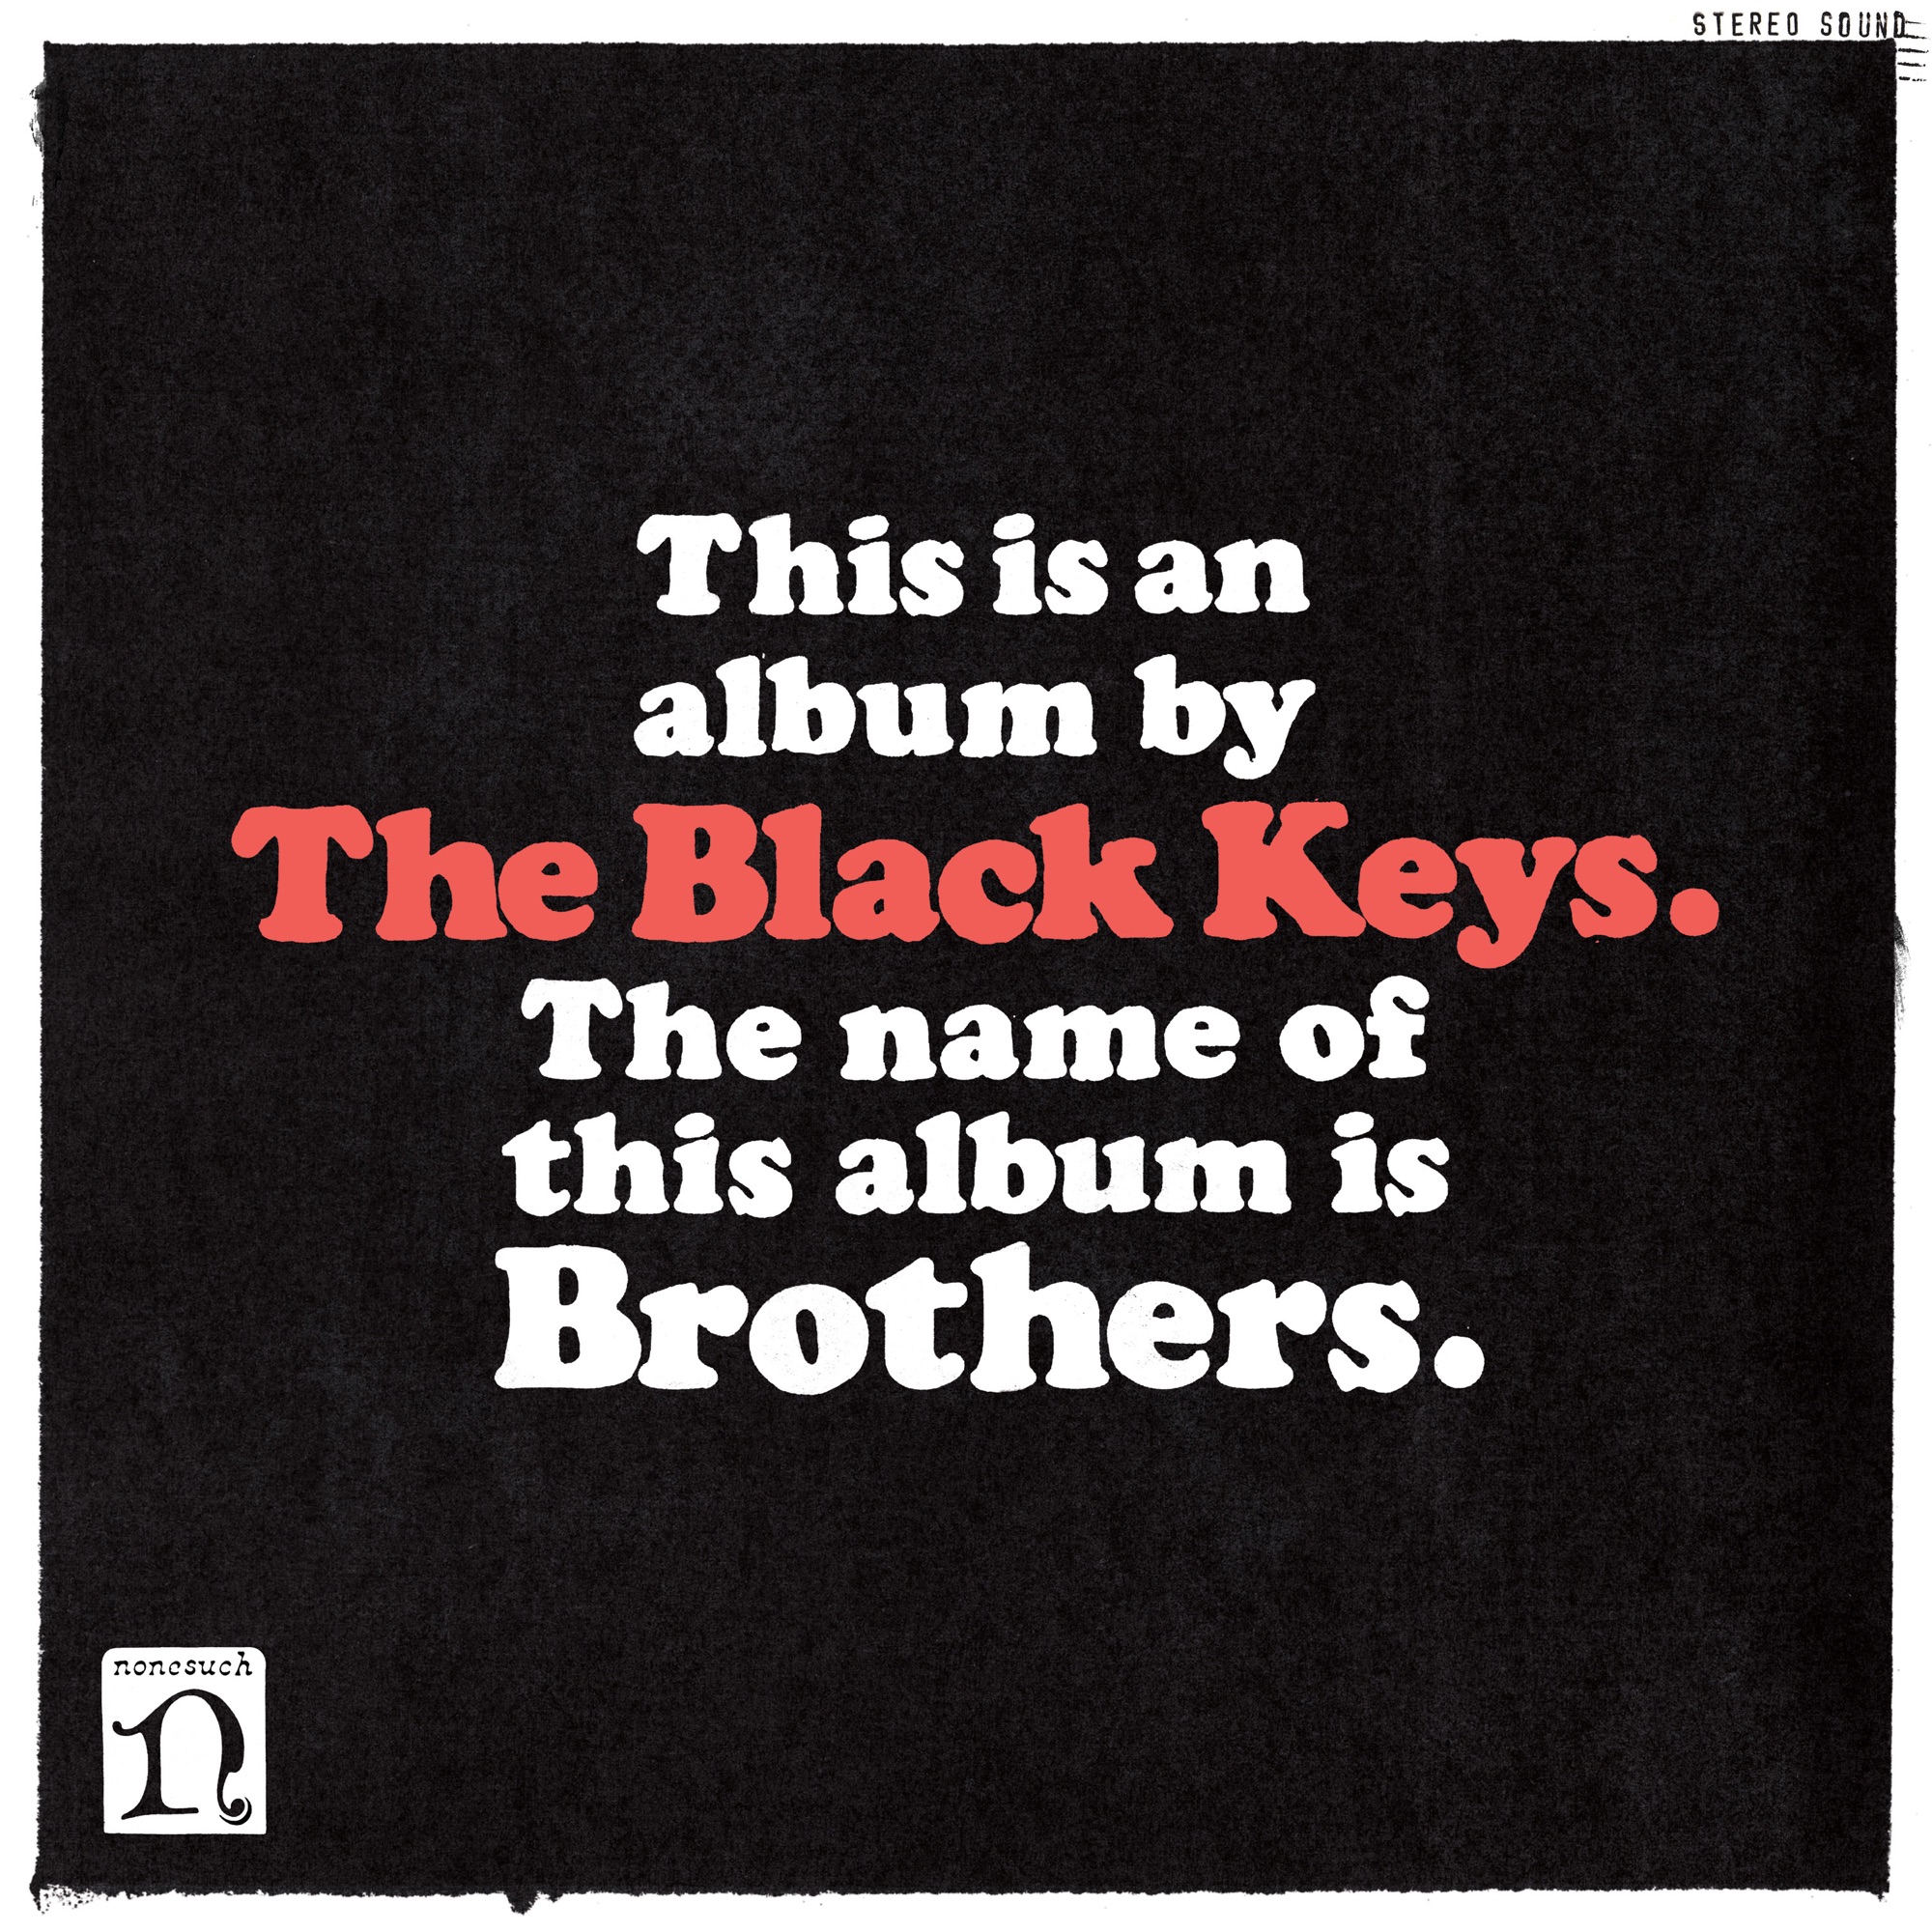 The Black Keys - Keep My Name Outta Your Mouth - Single